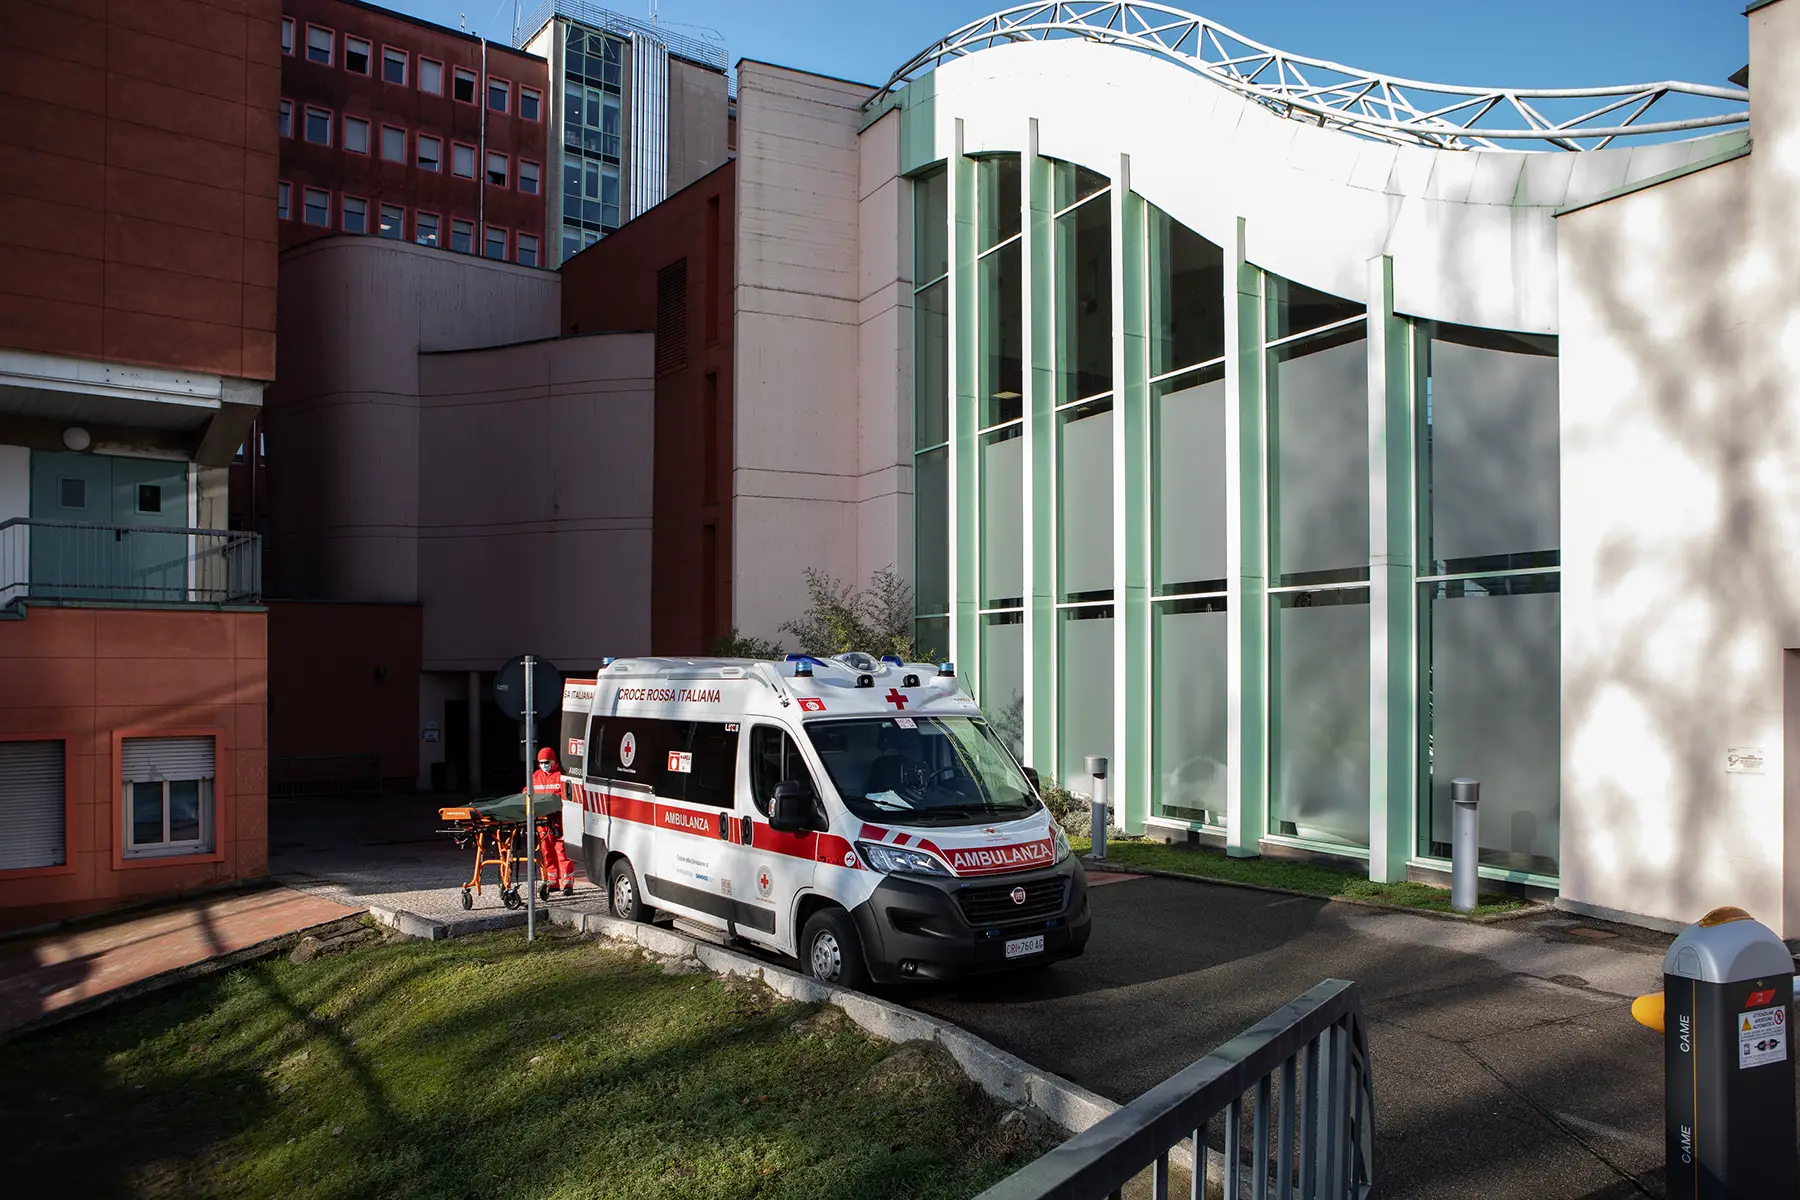 A hospital building with an ambulance parked outside